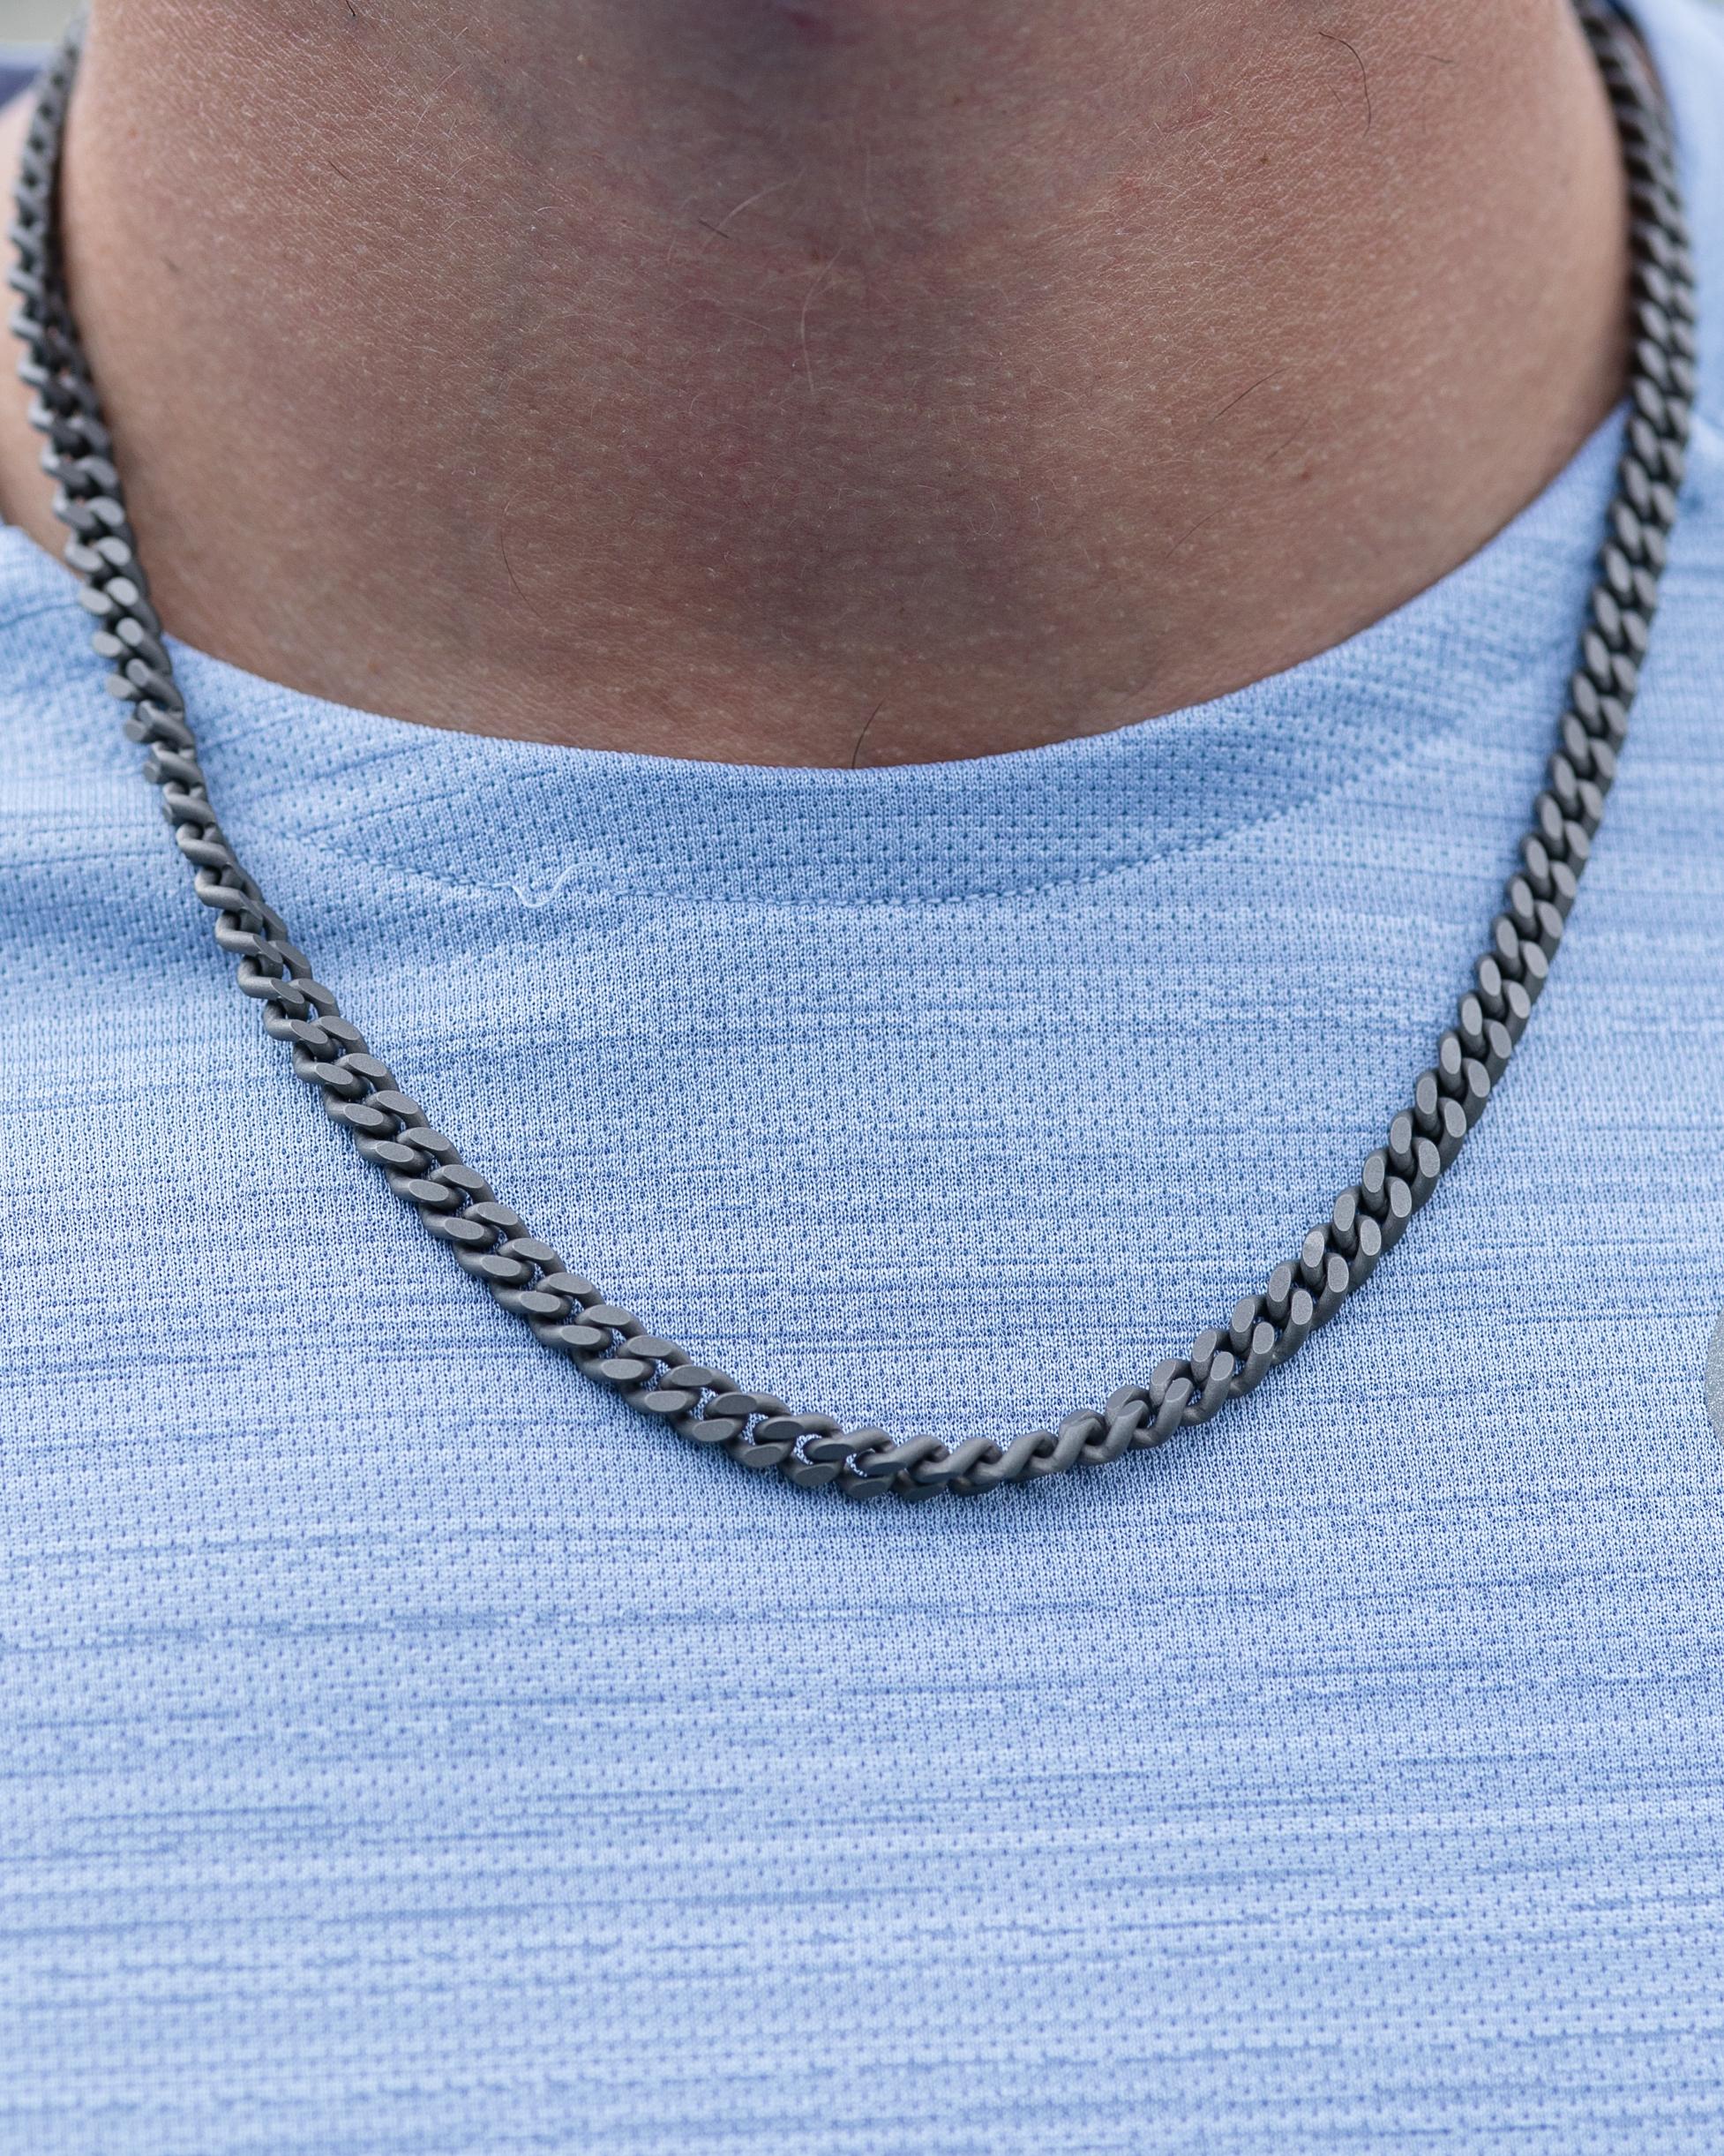 Titanium modern curb necklace is from our Heroes Collection. The necklace is made of titanium with a decorative round black diamond 0.01 Carat on the closing. The total metal weight is 0.15gr. The chain is 50cm long. Perfect for manly look!

The